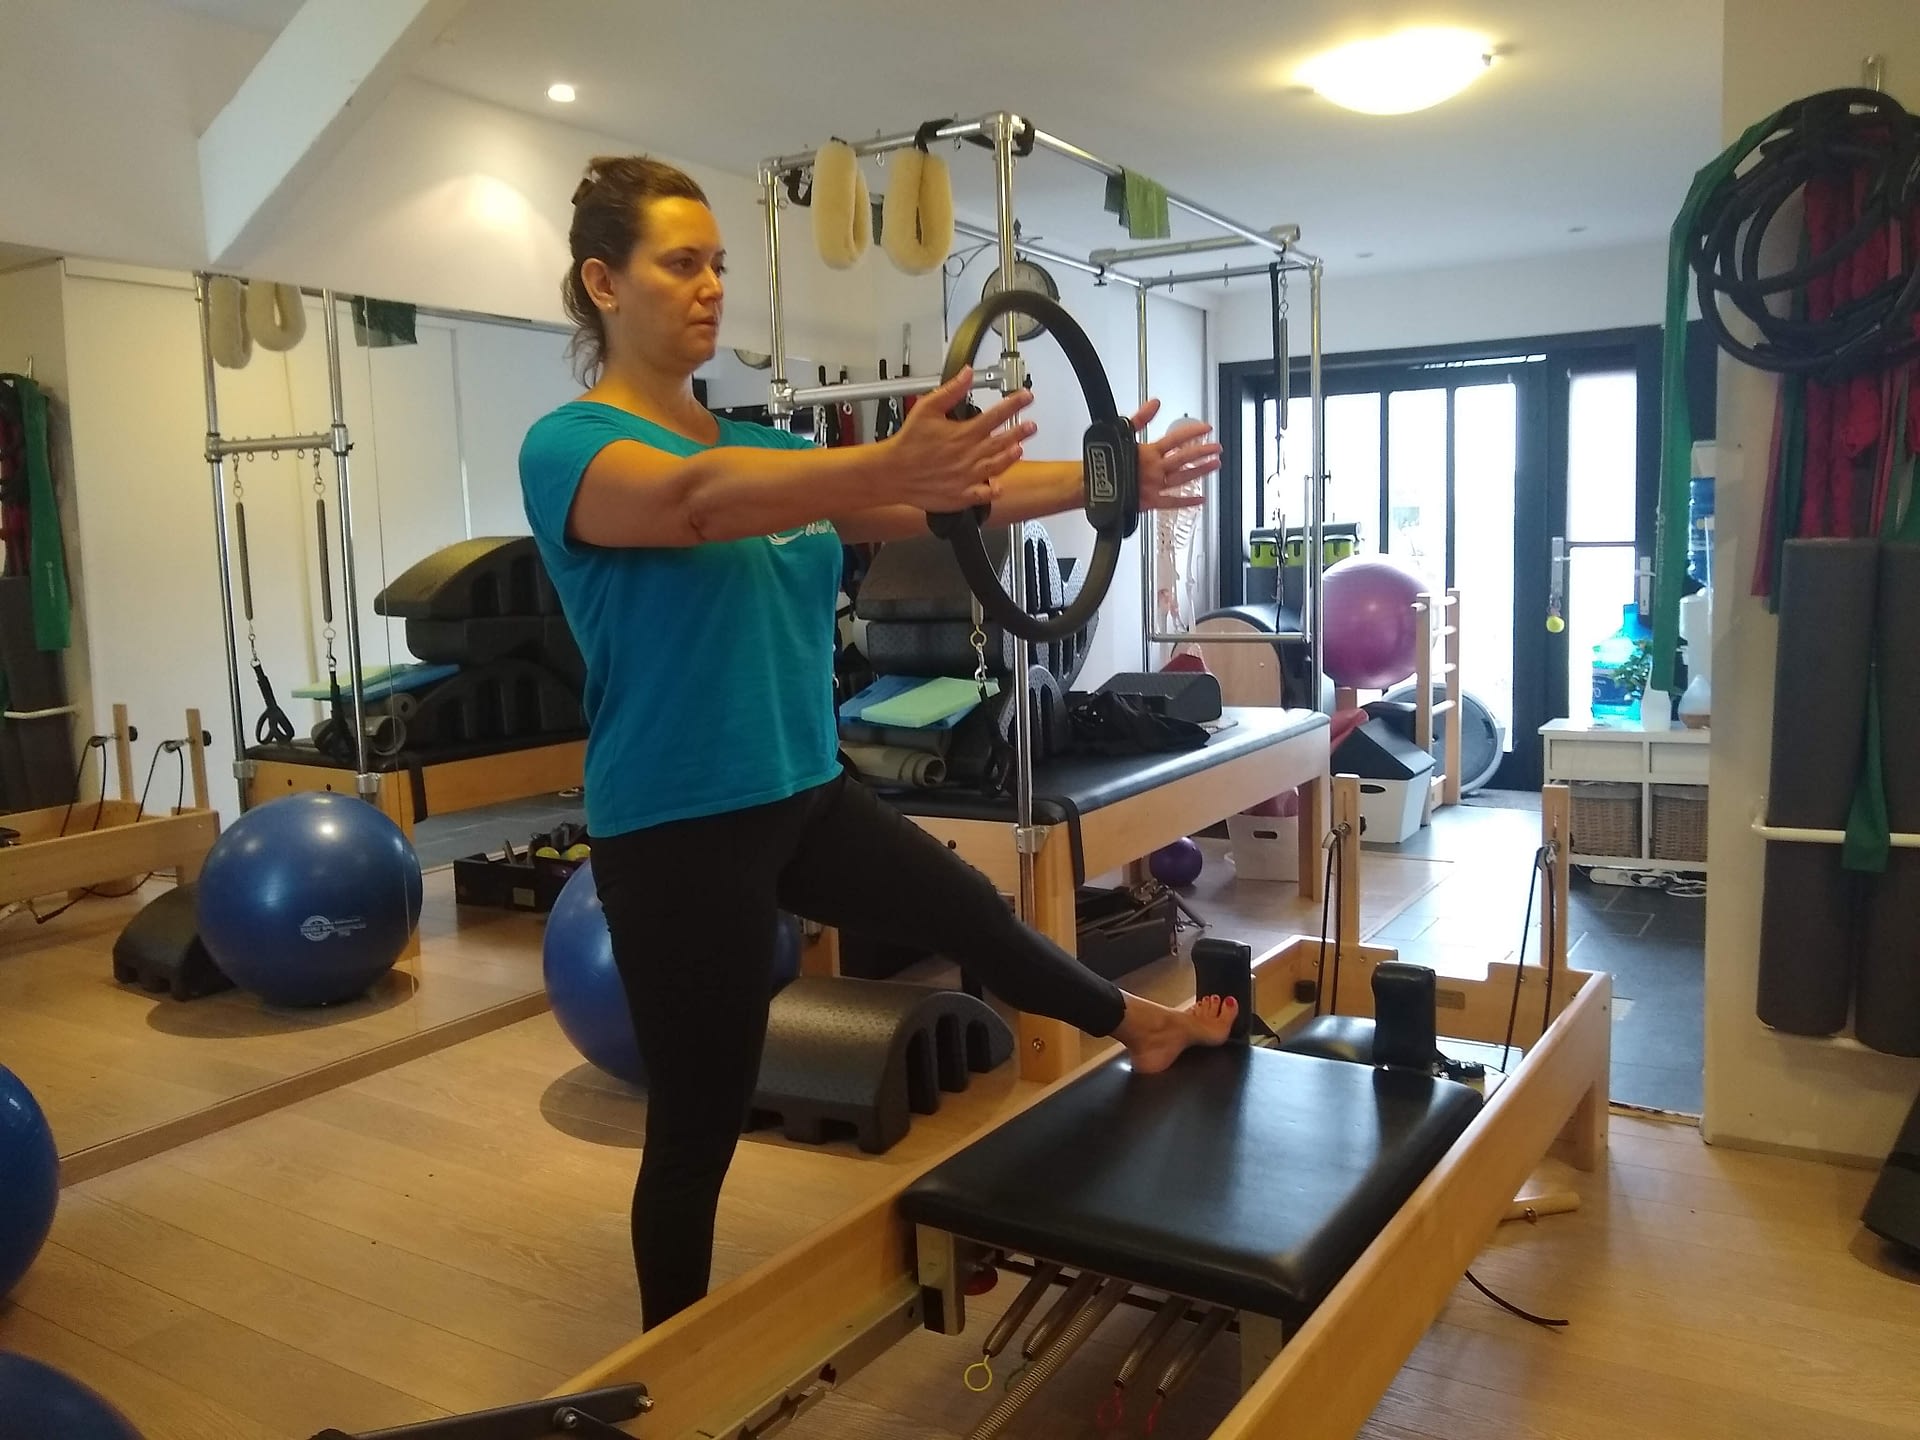 Feet In Straps on the Reformer  Pseudo-Closed Chain Exercise